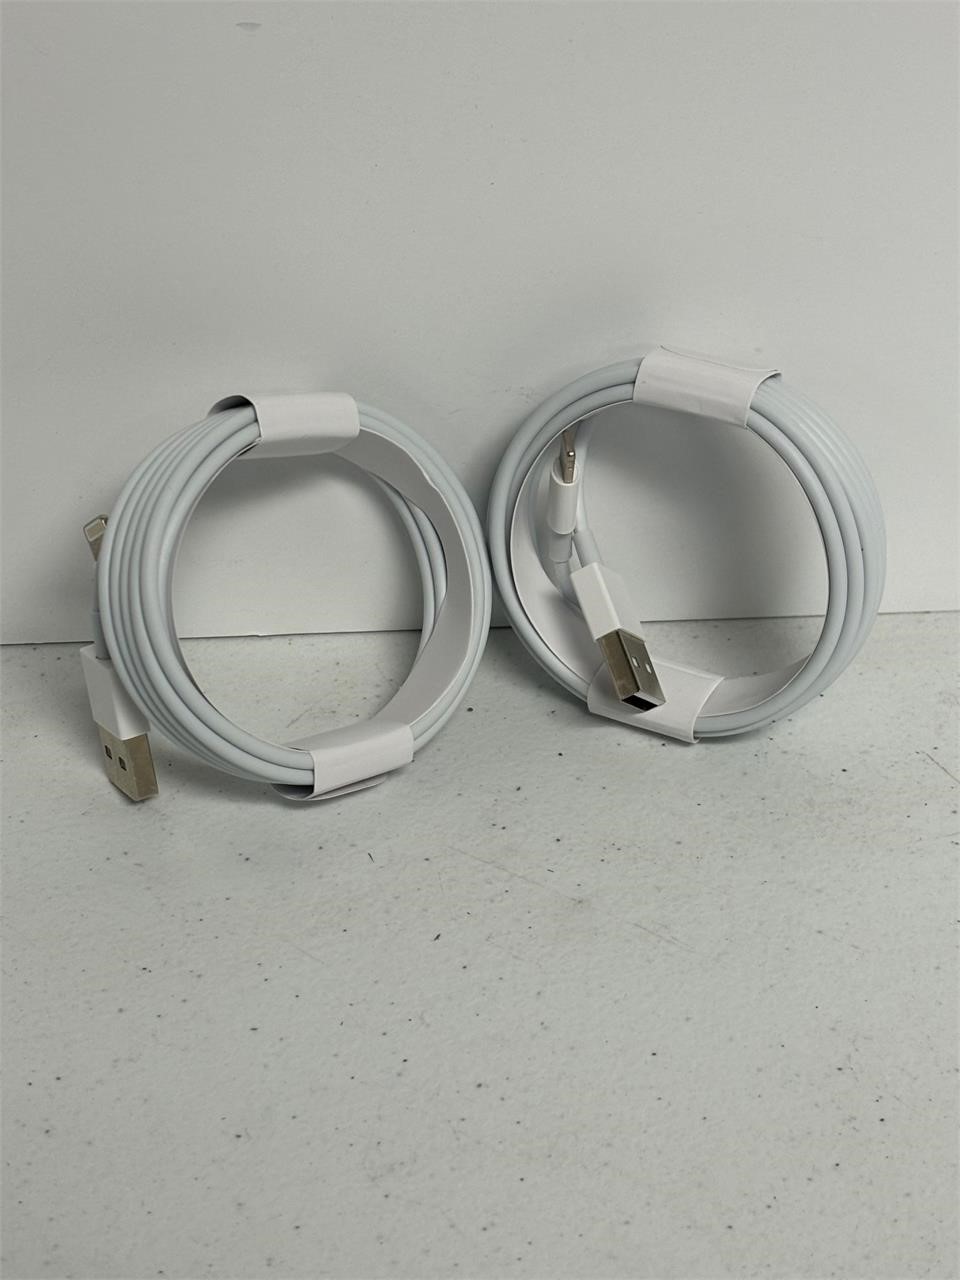 2 New 6ft IPhone Charging Cables